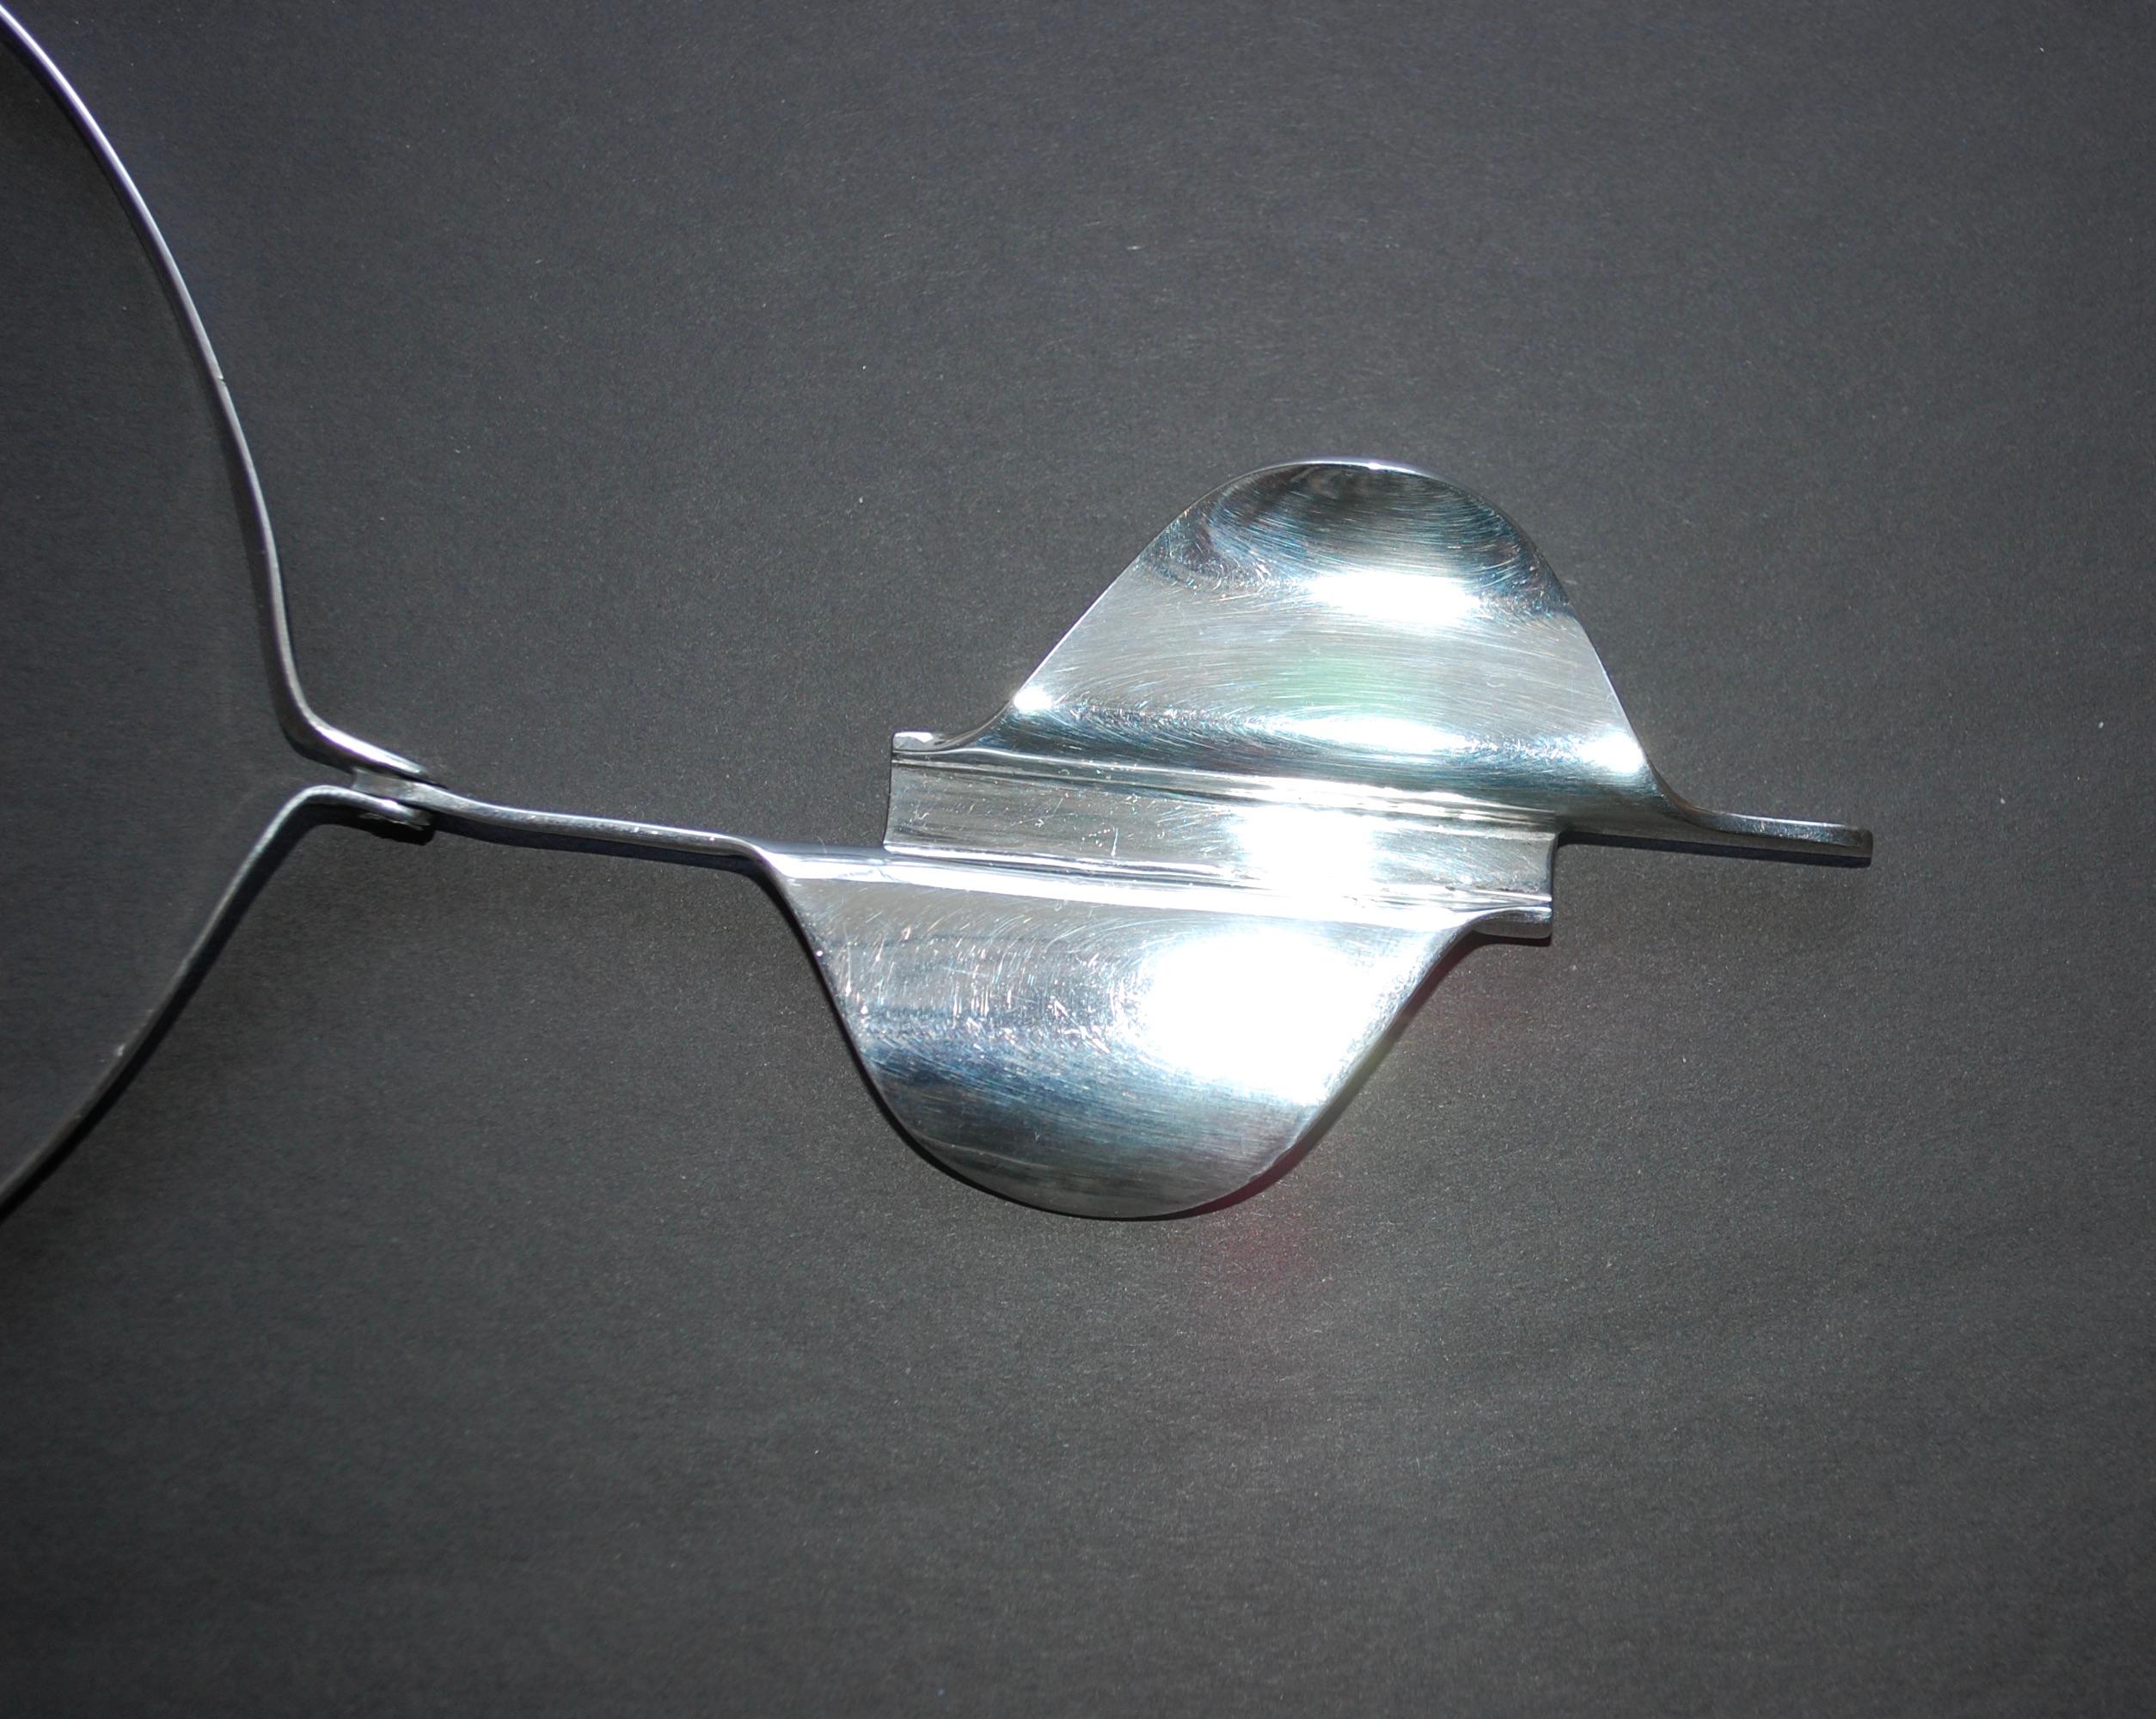 Stunning sterling chocker with pendant, marked sterling.
About 77 grams the pendent 4.5 inch long and 2.25 width, total choker length about 16 long. 